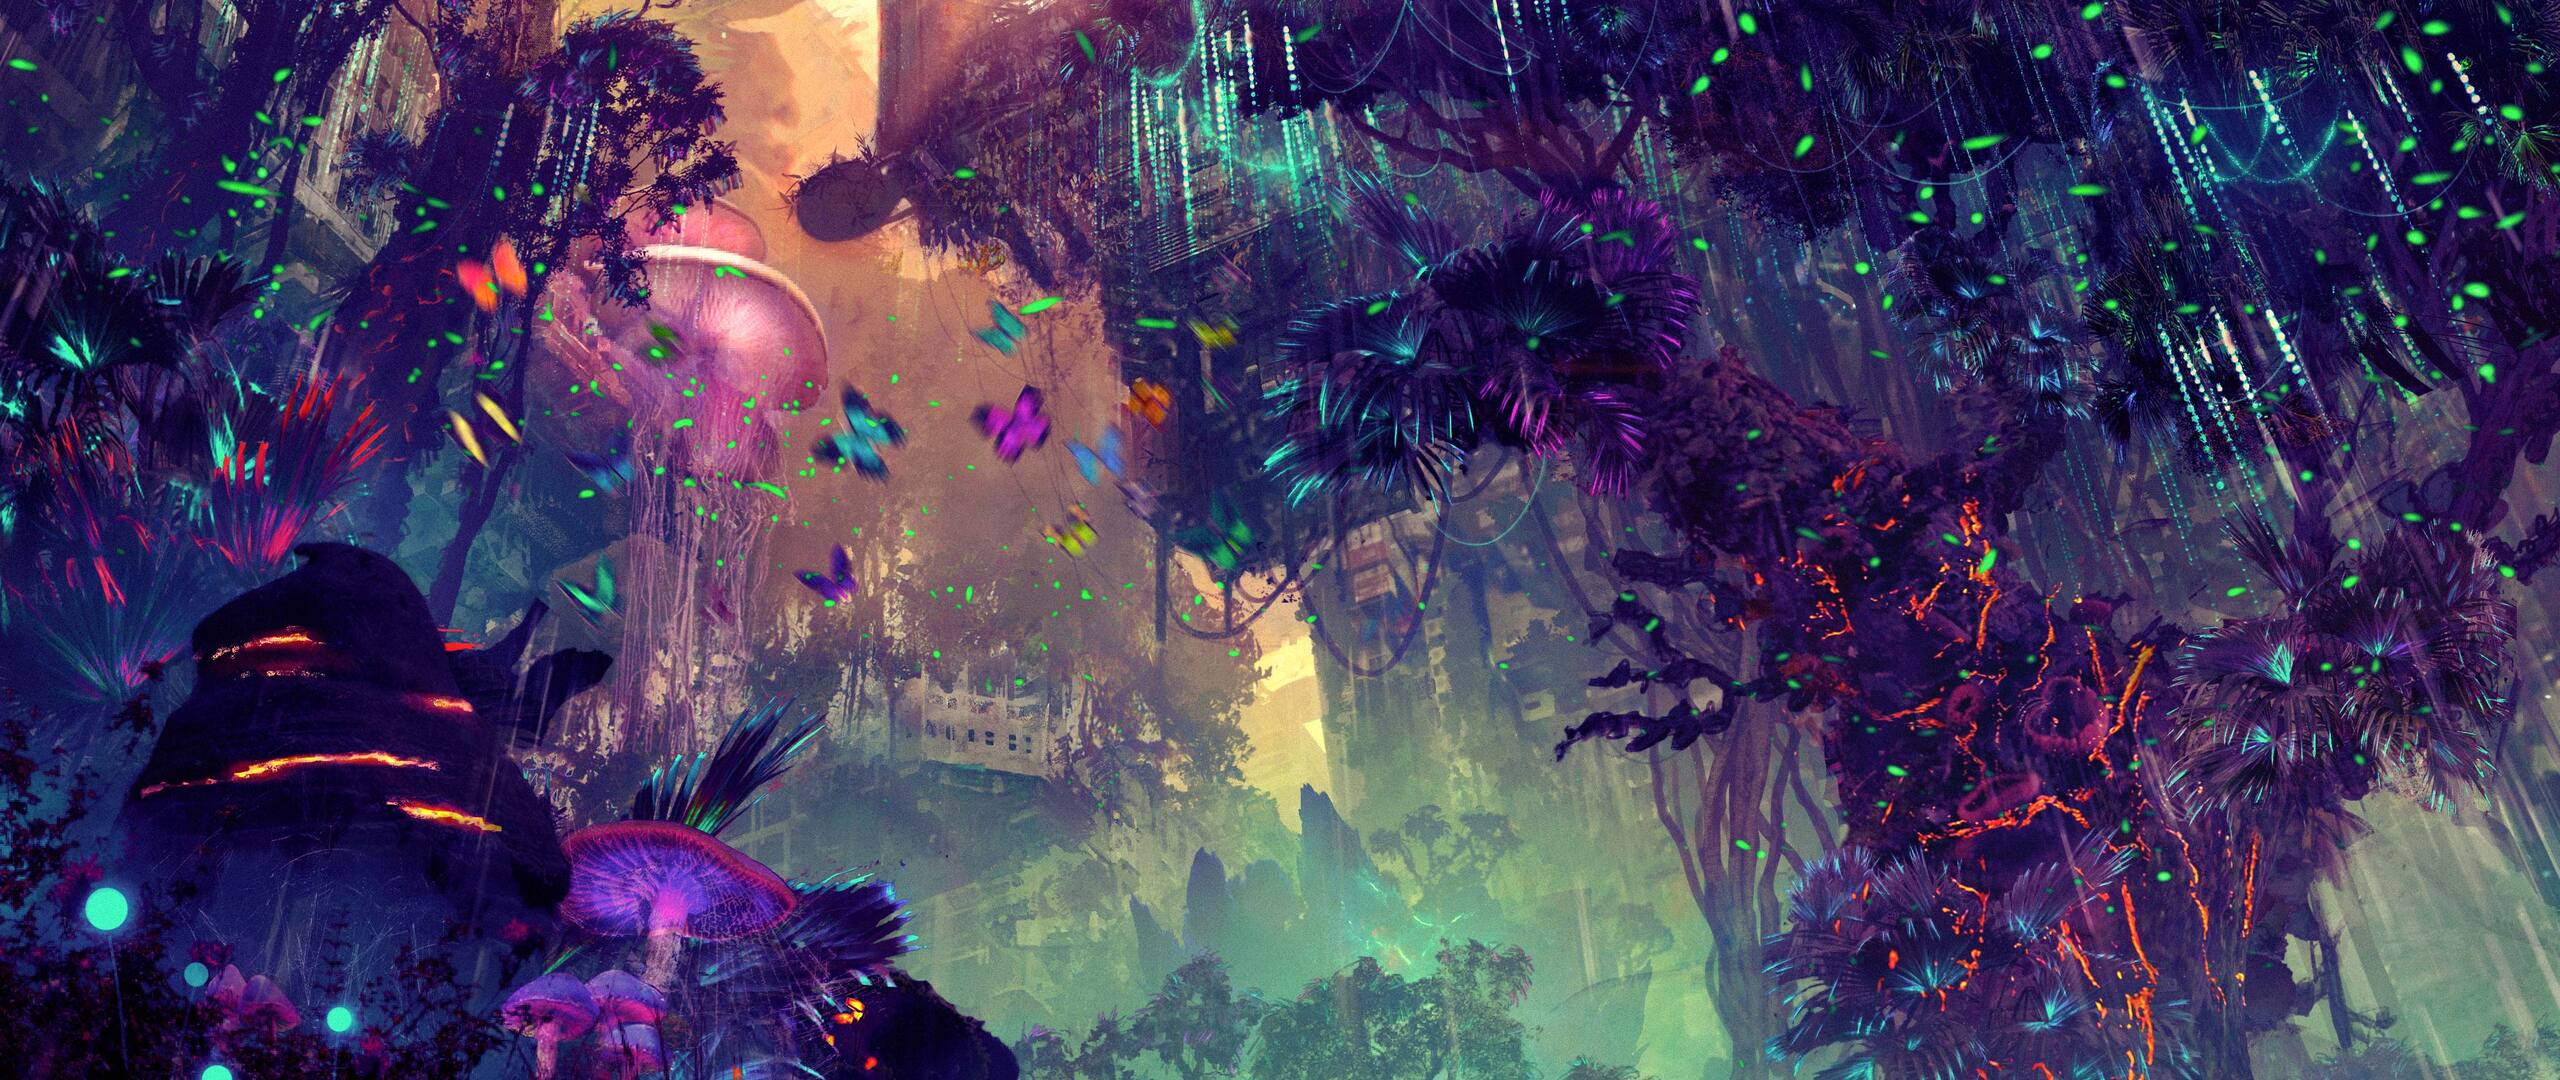 glowing-forest-colorful-digital-drawing-4k-27-2560x1080.jpg